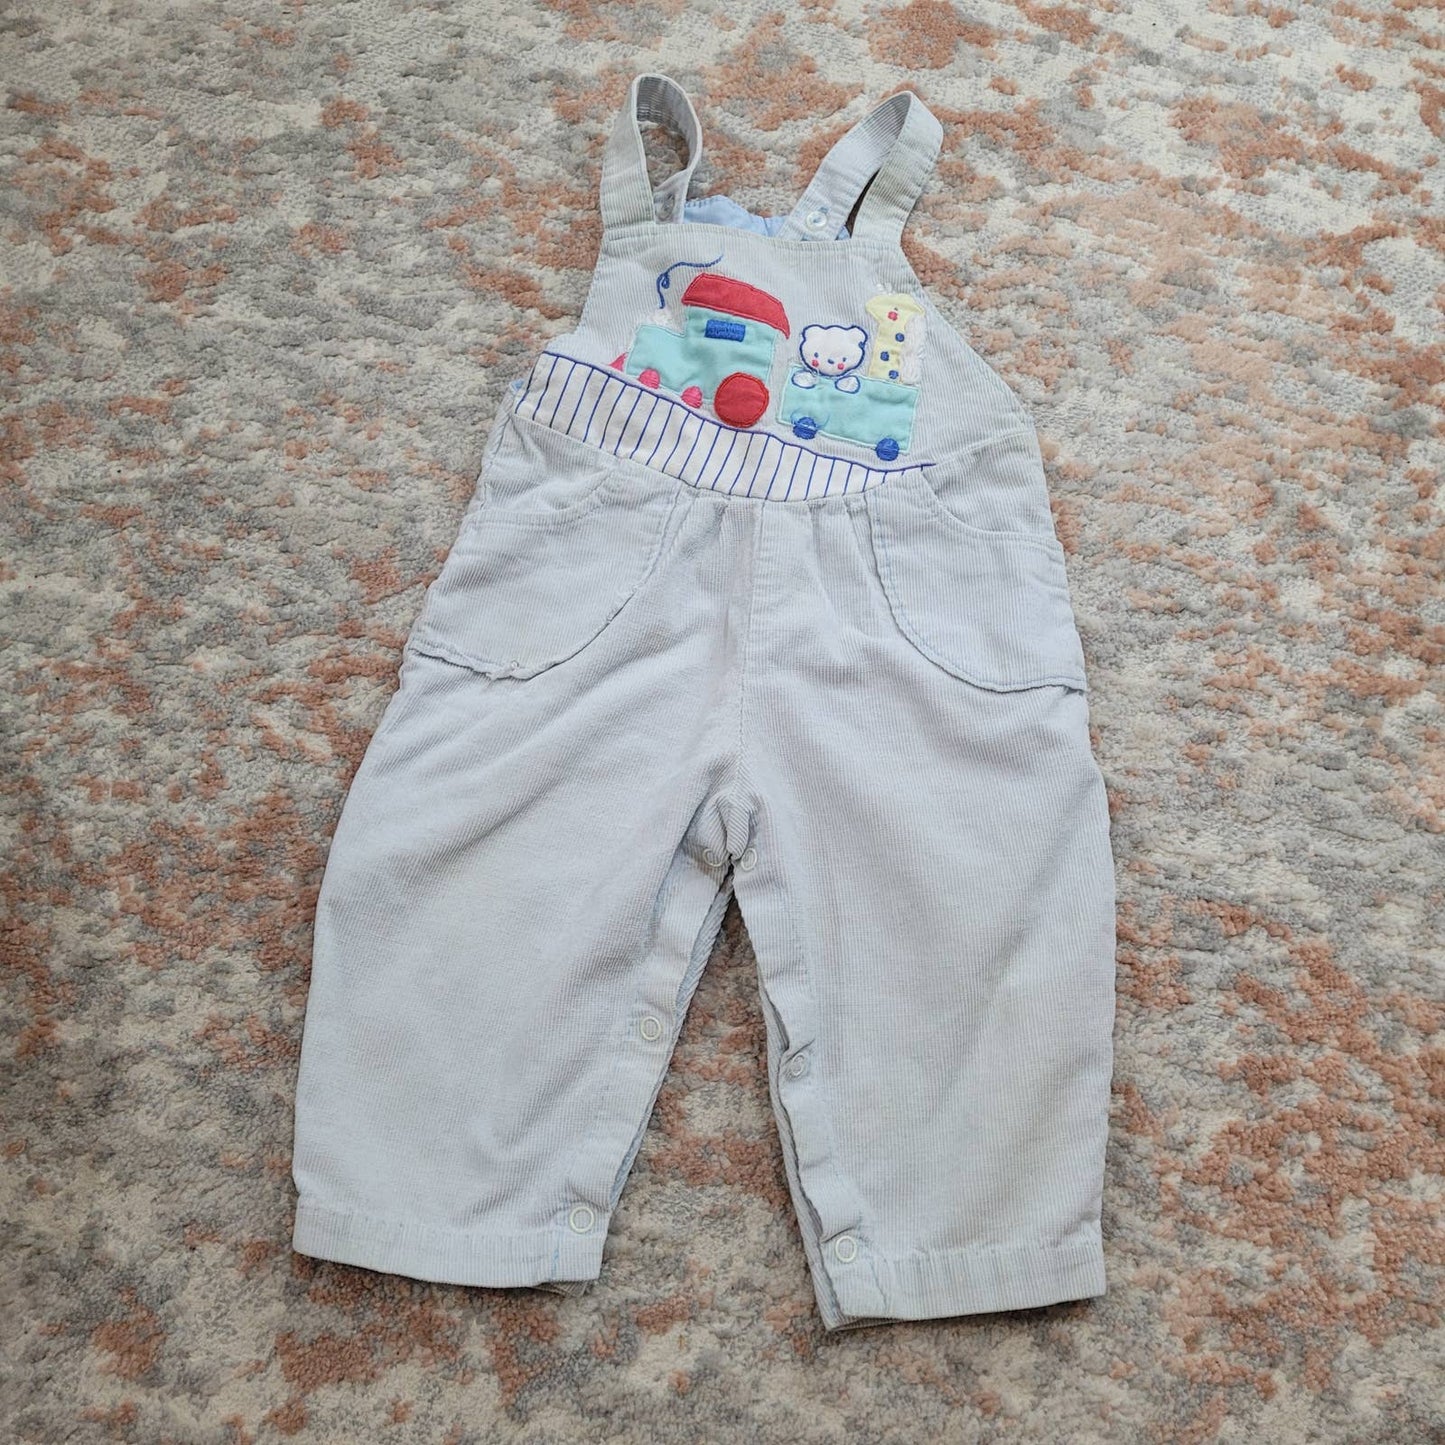 Blue Cordouroy Overalls with Bear and Giraffe on a Train